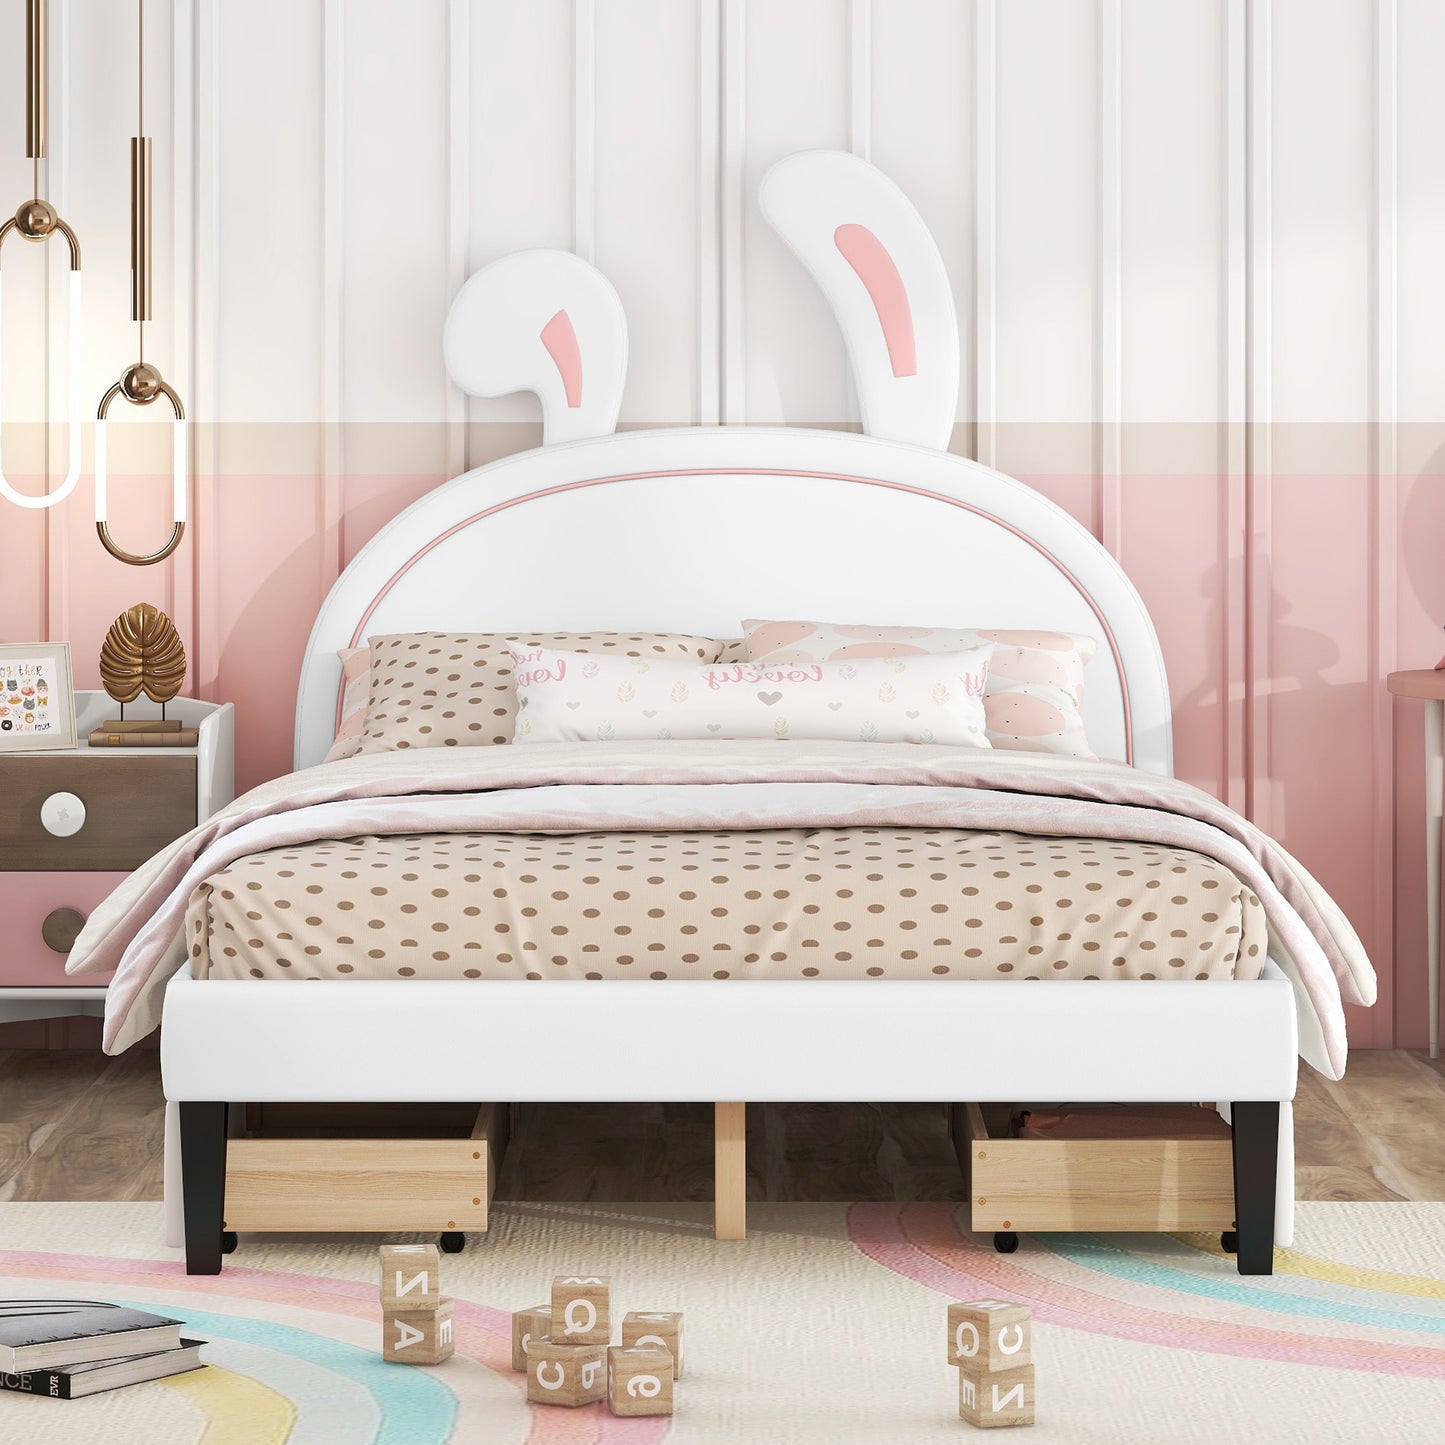 upholstered leather  bed with rabbit ornament and 4 drawers, white